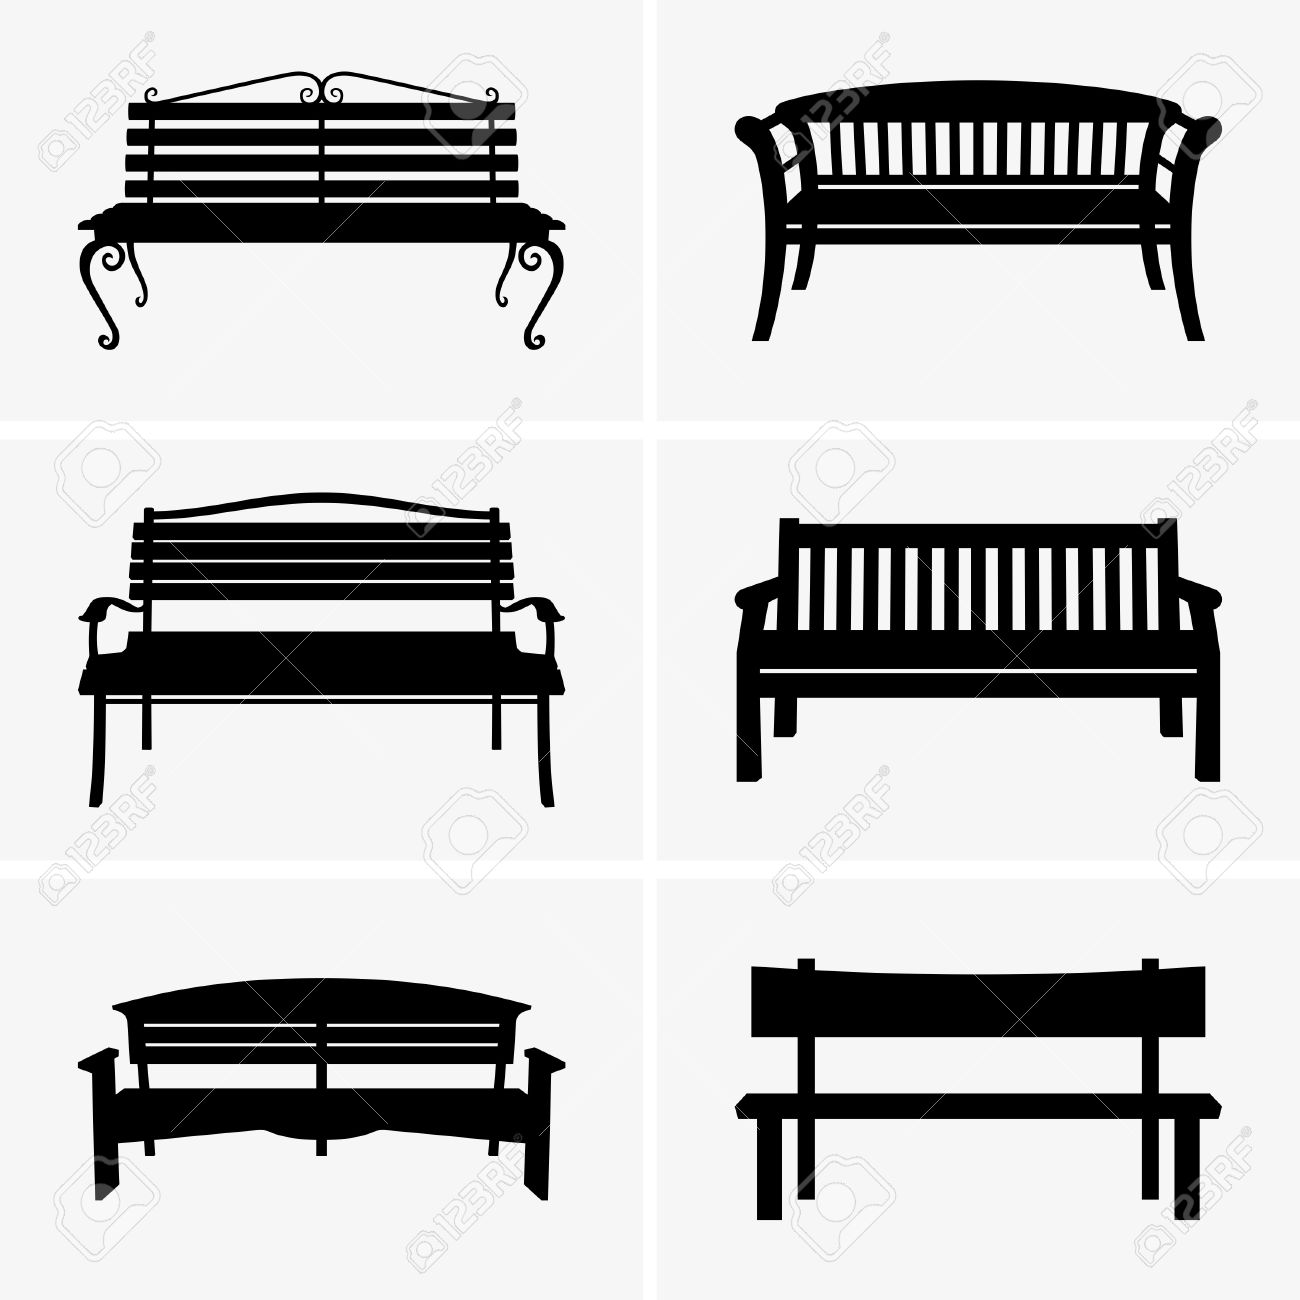 Park Bench clipart #5, Download drawings